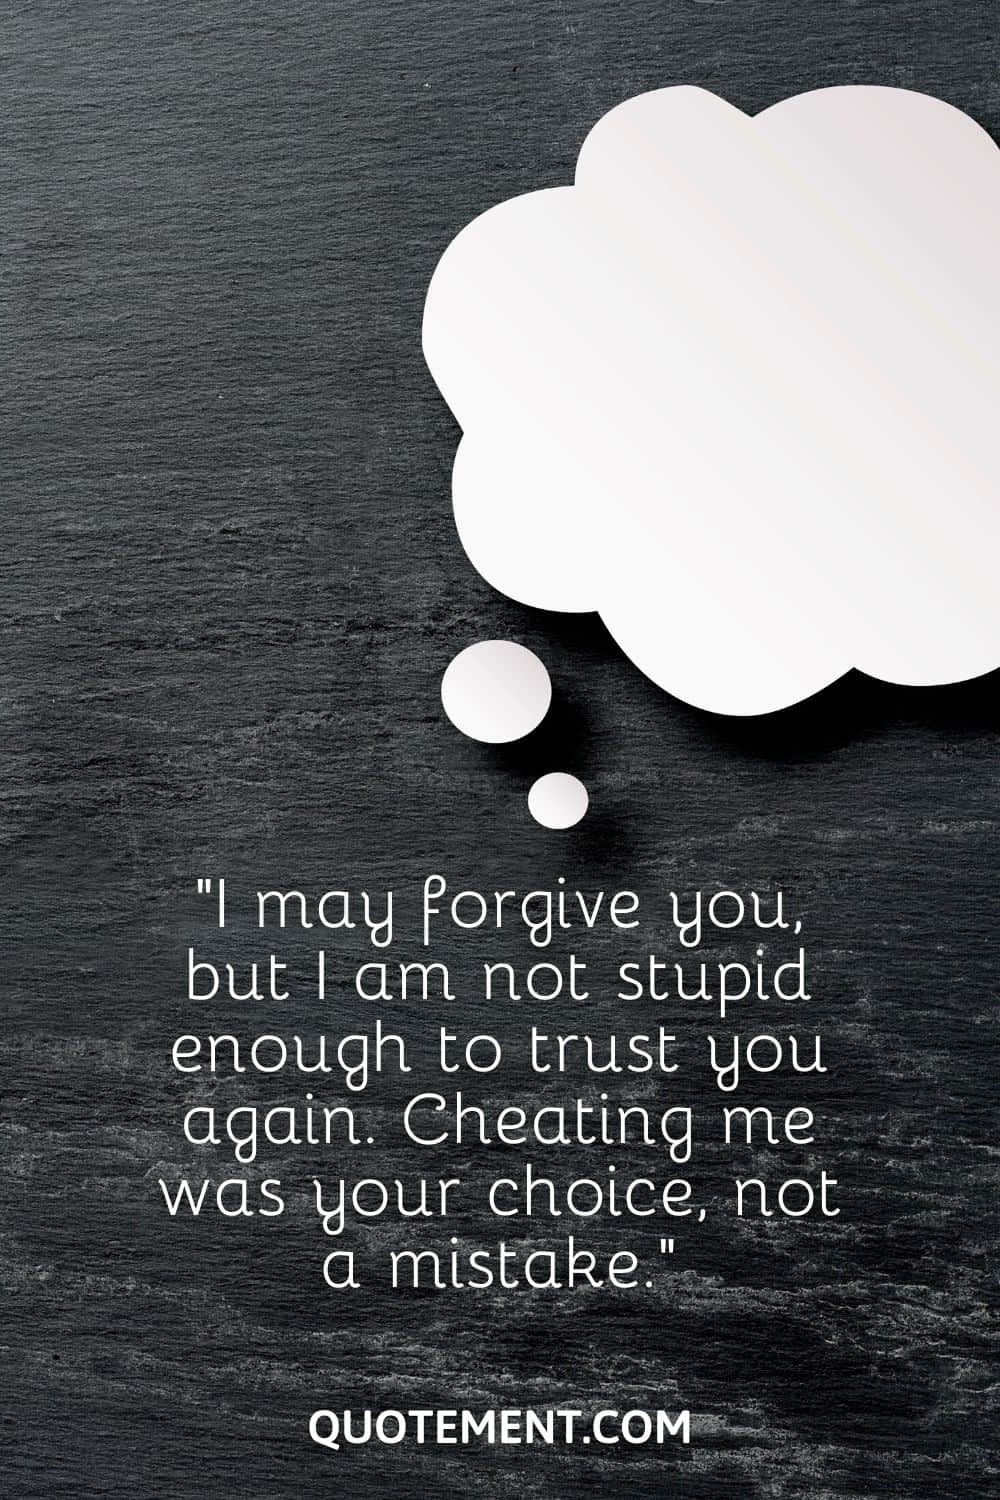 “I may forgive you, but I am not stupid enough to trust you again. Cheating me was your choice, not a mistake.”